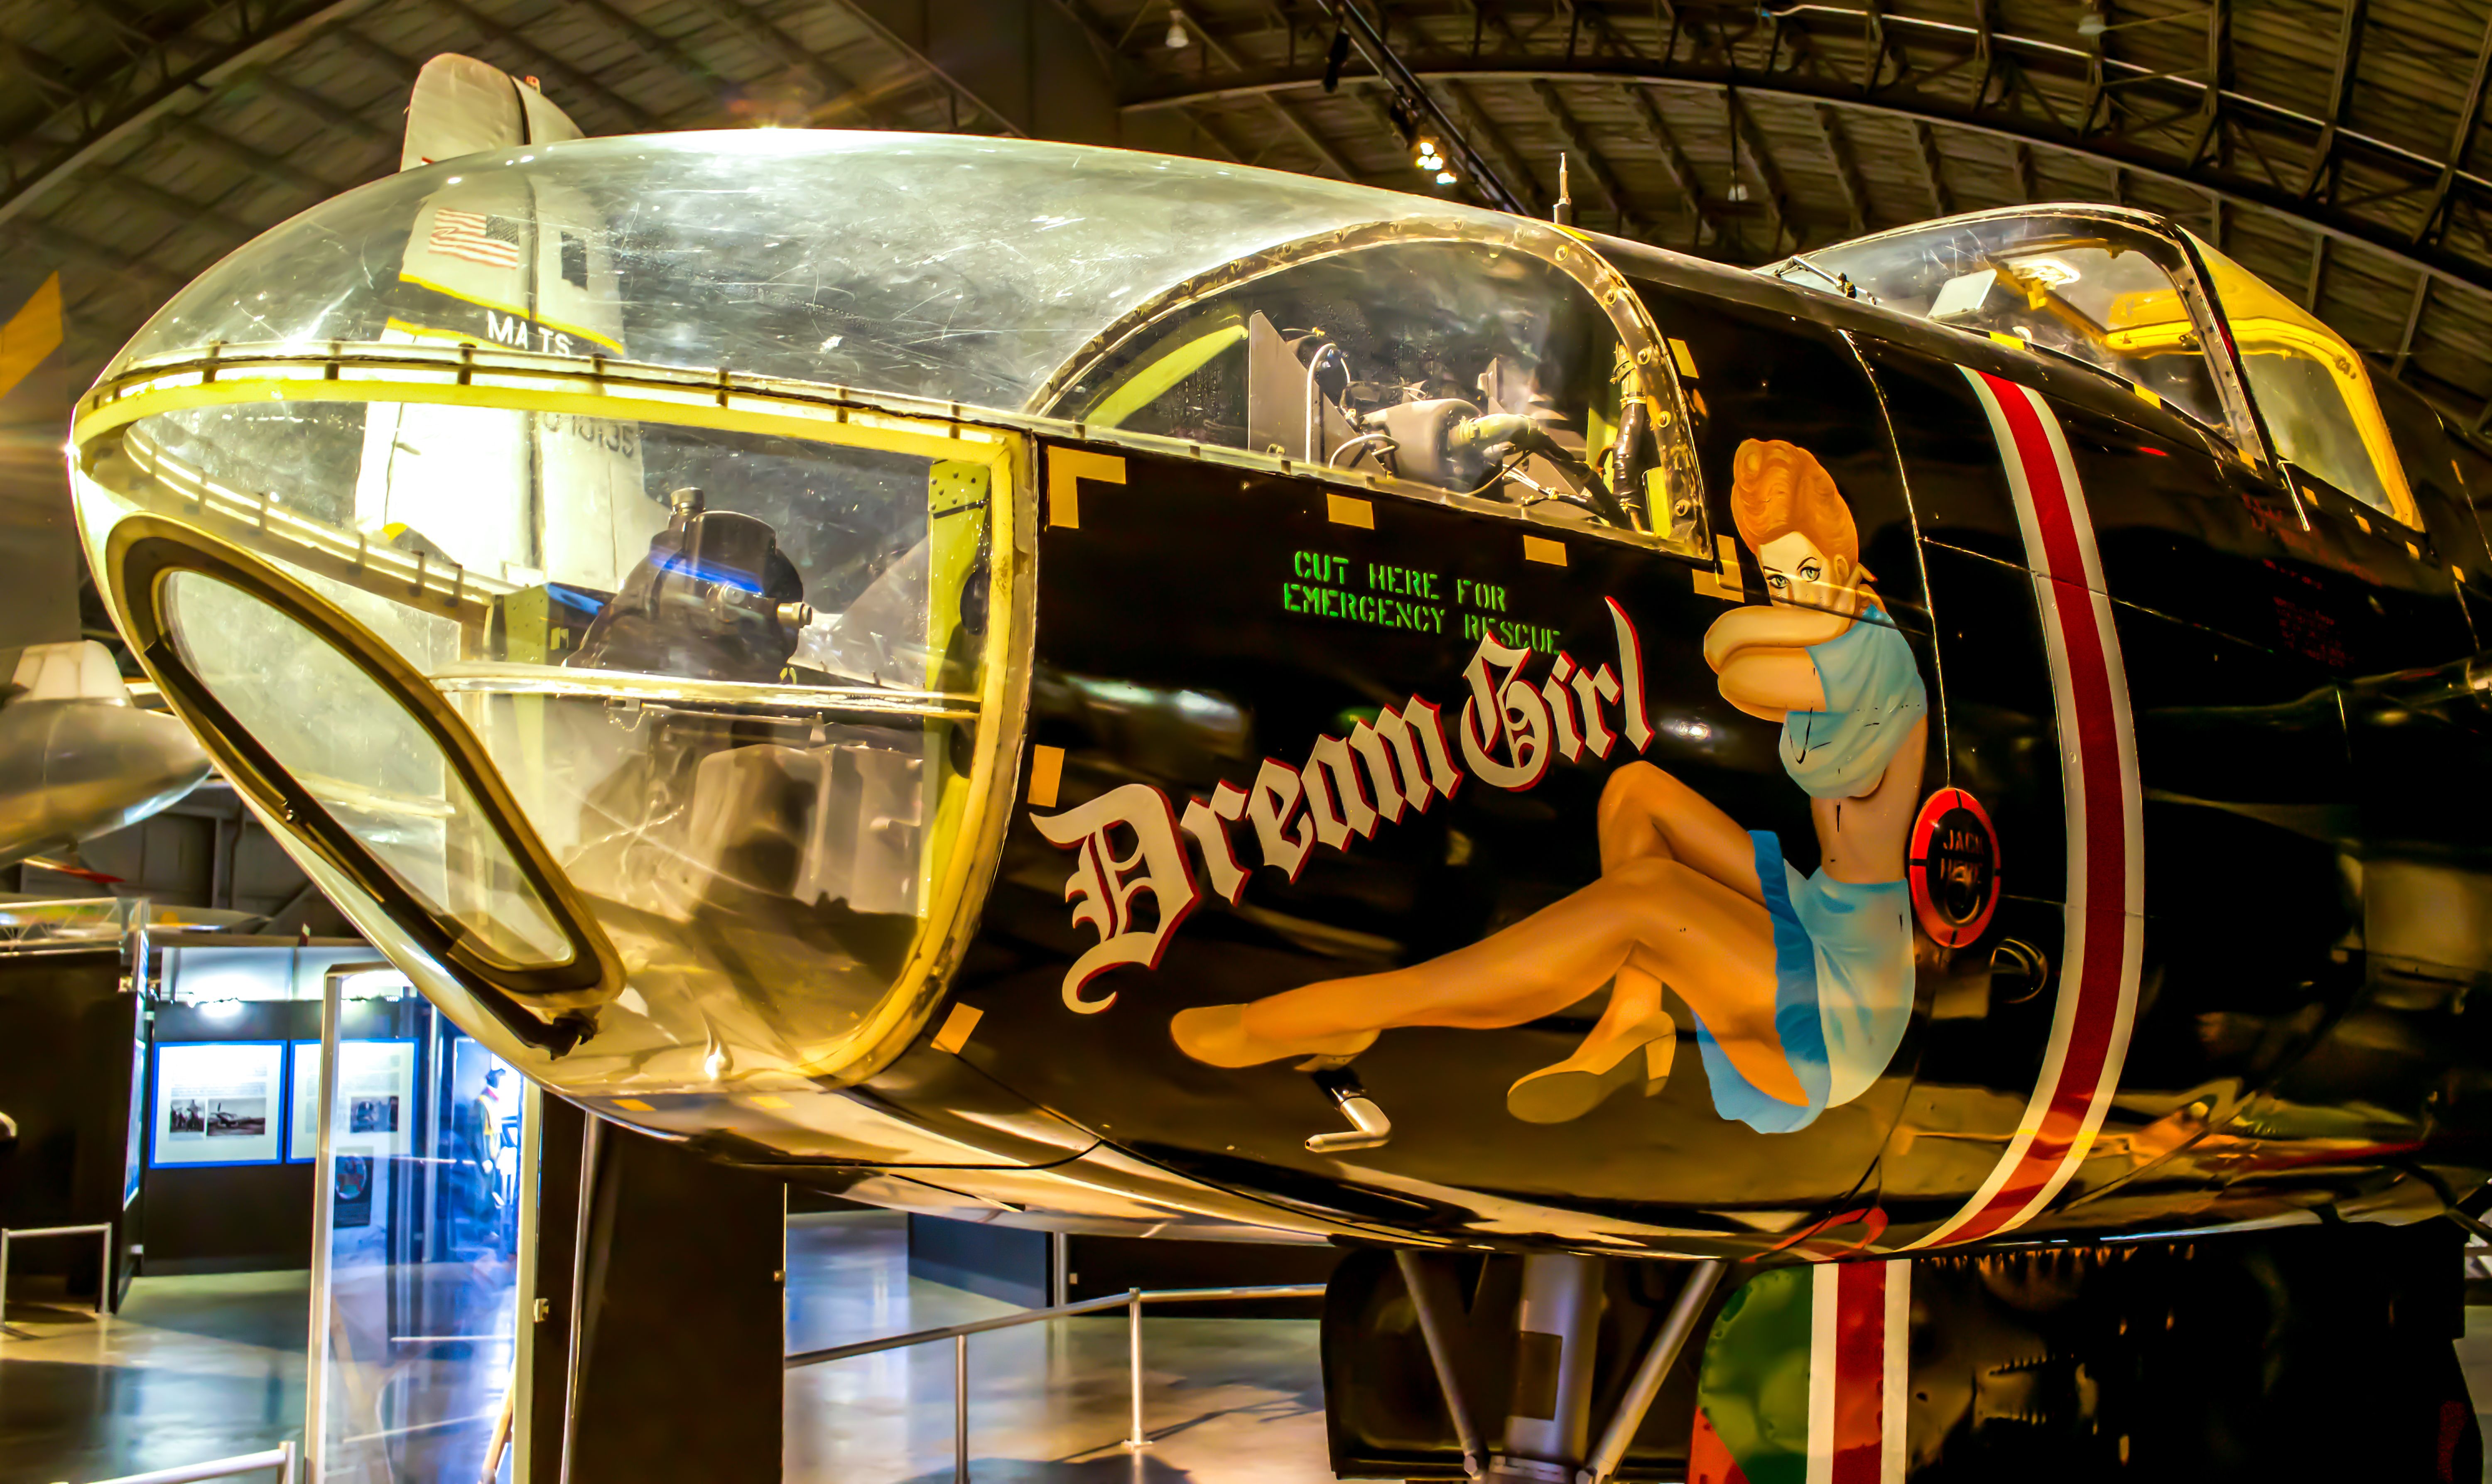 Wallpaper, ART, girl, museum, airplane, nose, aircraft, military, Sony, air, dream, usaf, wrightpattersonafb, nationalmuseumoftheunitedstatesairforce, rx sonyrx taoolezeskiphotography 6000x3574